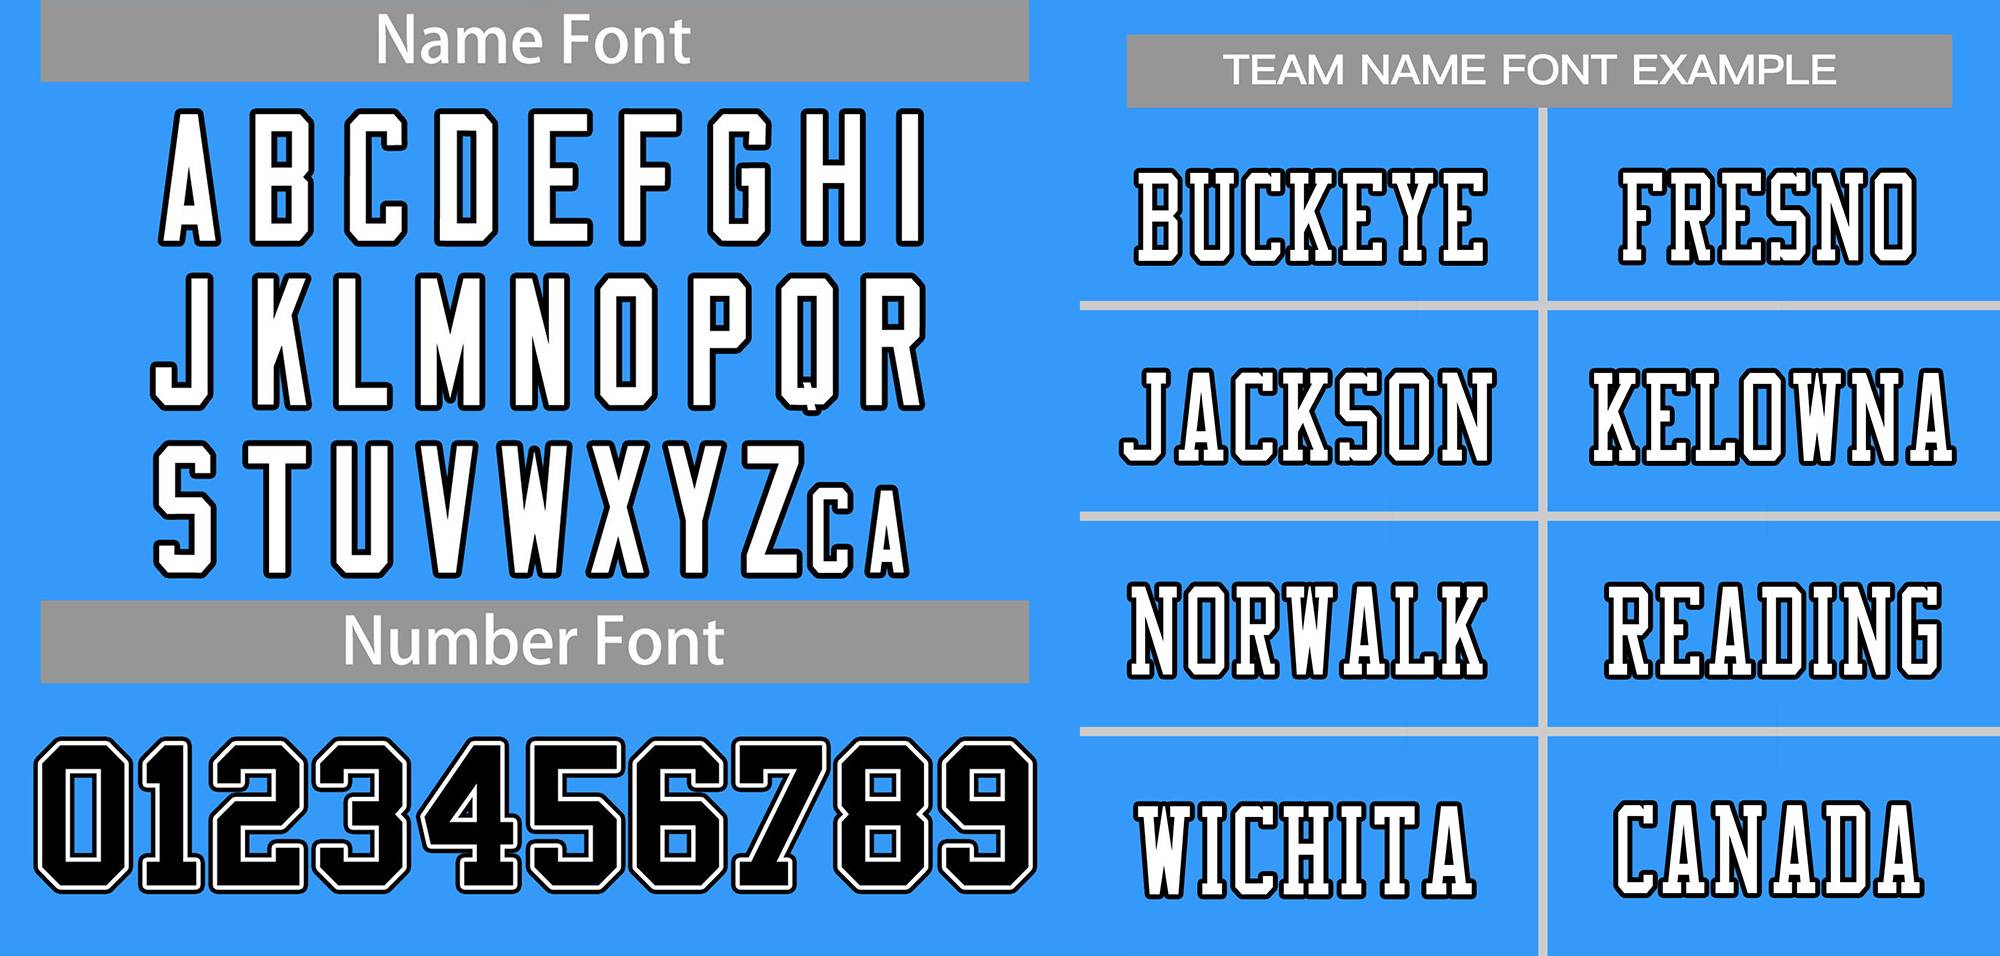 personalized football jersey team name font